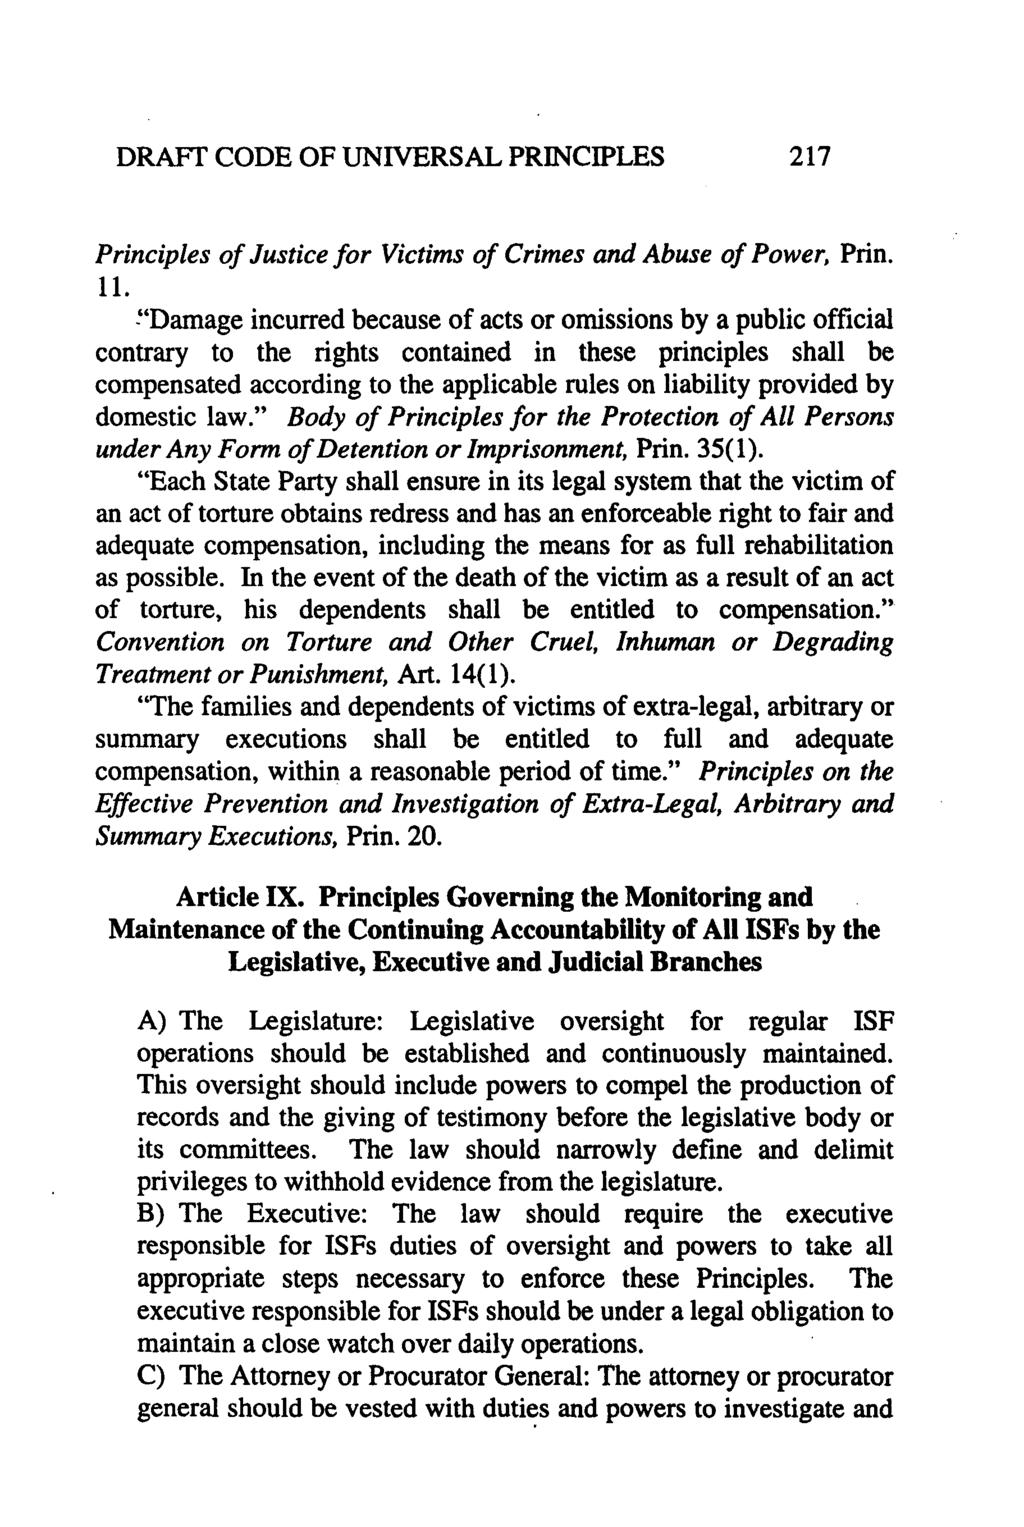 DRAFT CODE OF UNIVERSAL PRINCIPLES Principles of Justice for Victims of Crimes and Abuse of Power, Prin. 11.